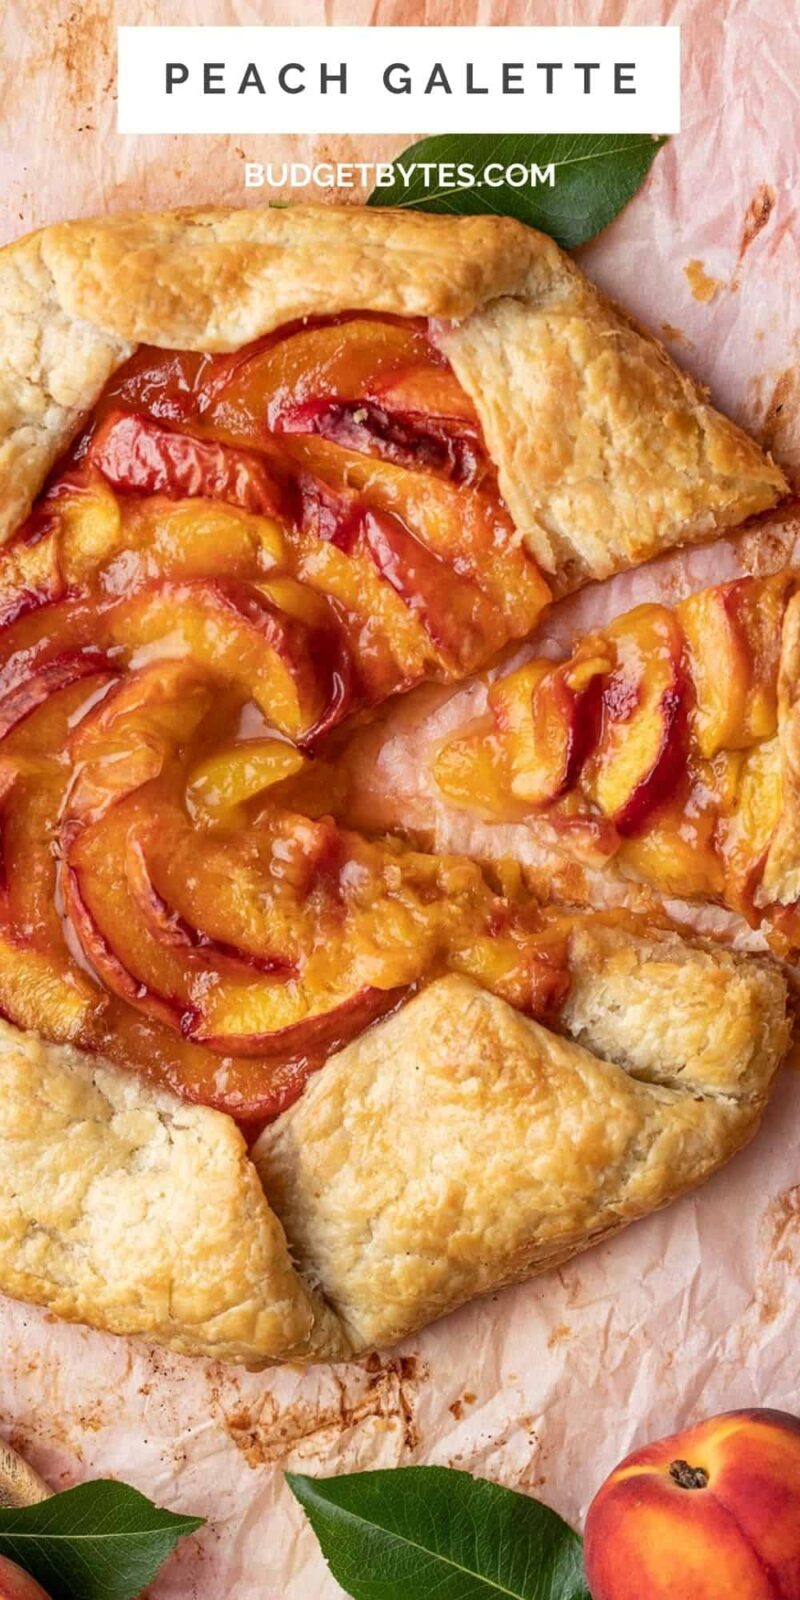 Overhead close up shot of slice being removed from Peach Galette.